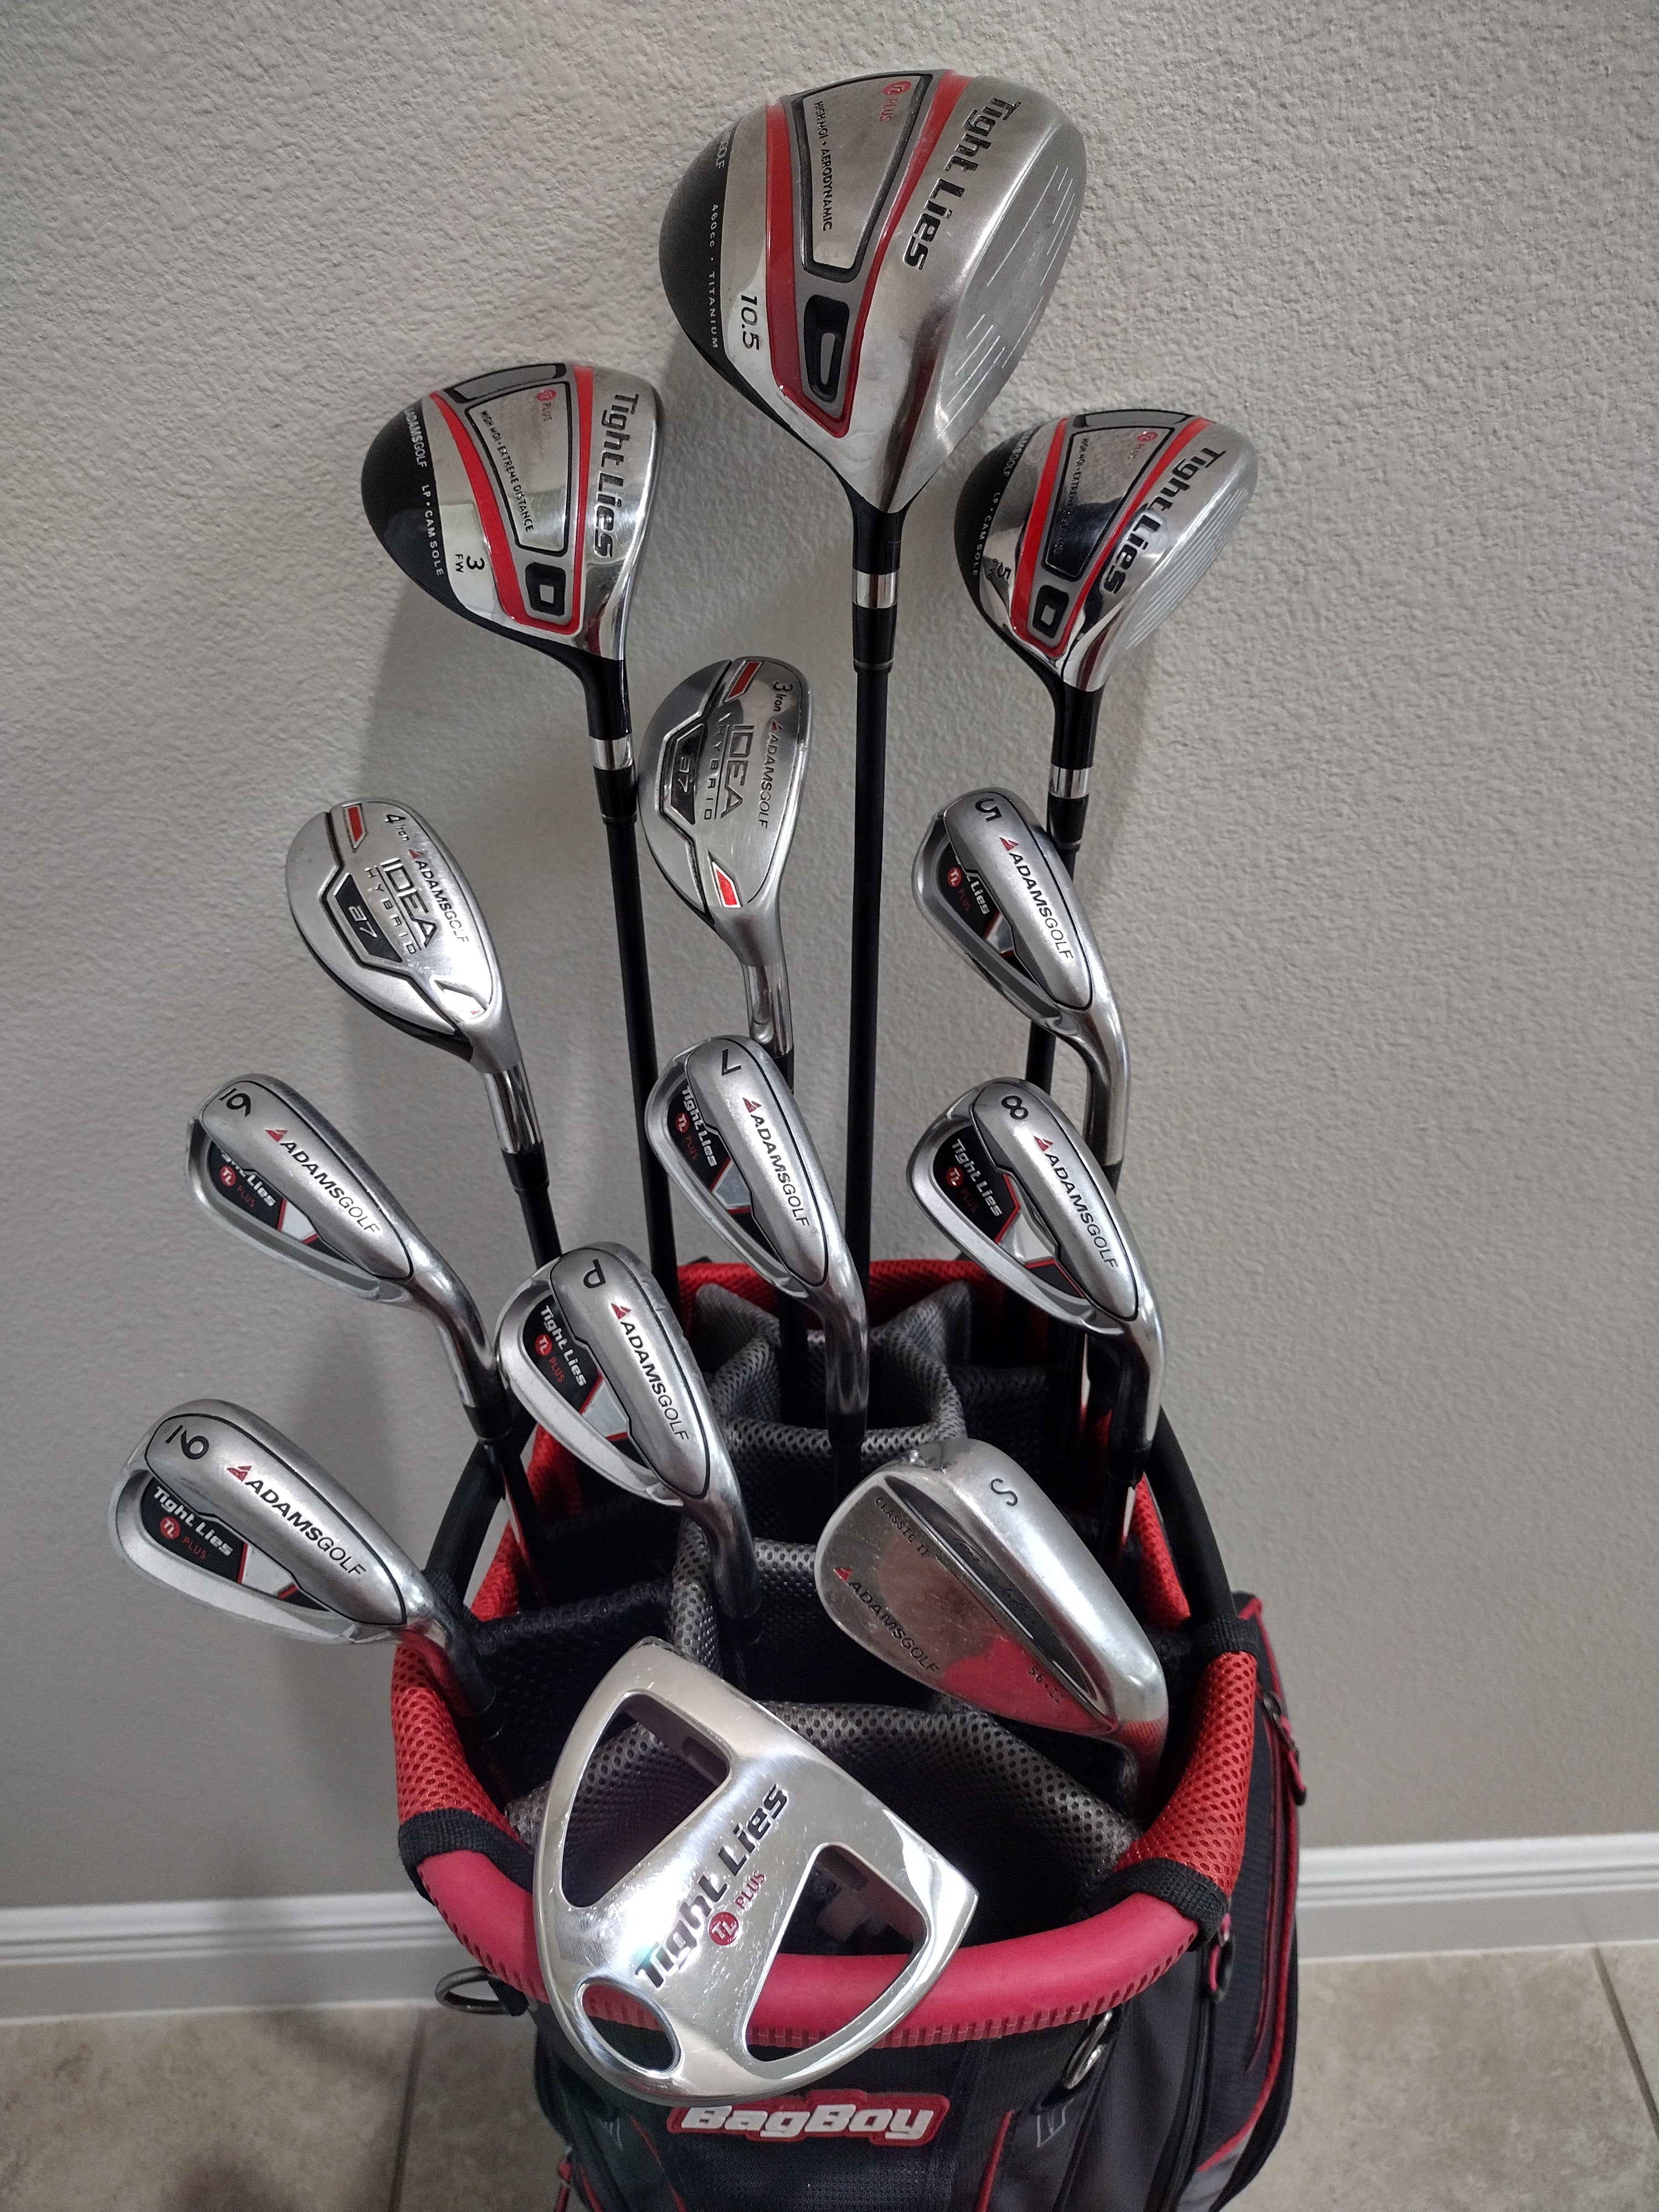 Golf Clubs Complete Set for Men 13 Piece Includes Titanium Golf Driver, 3 &  #5 Fairway Woods, 4 Hybr…See more Golf Clubs Complete Set for Men 13 Piece